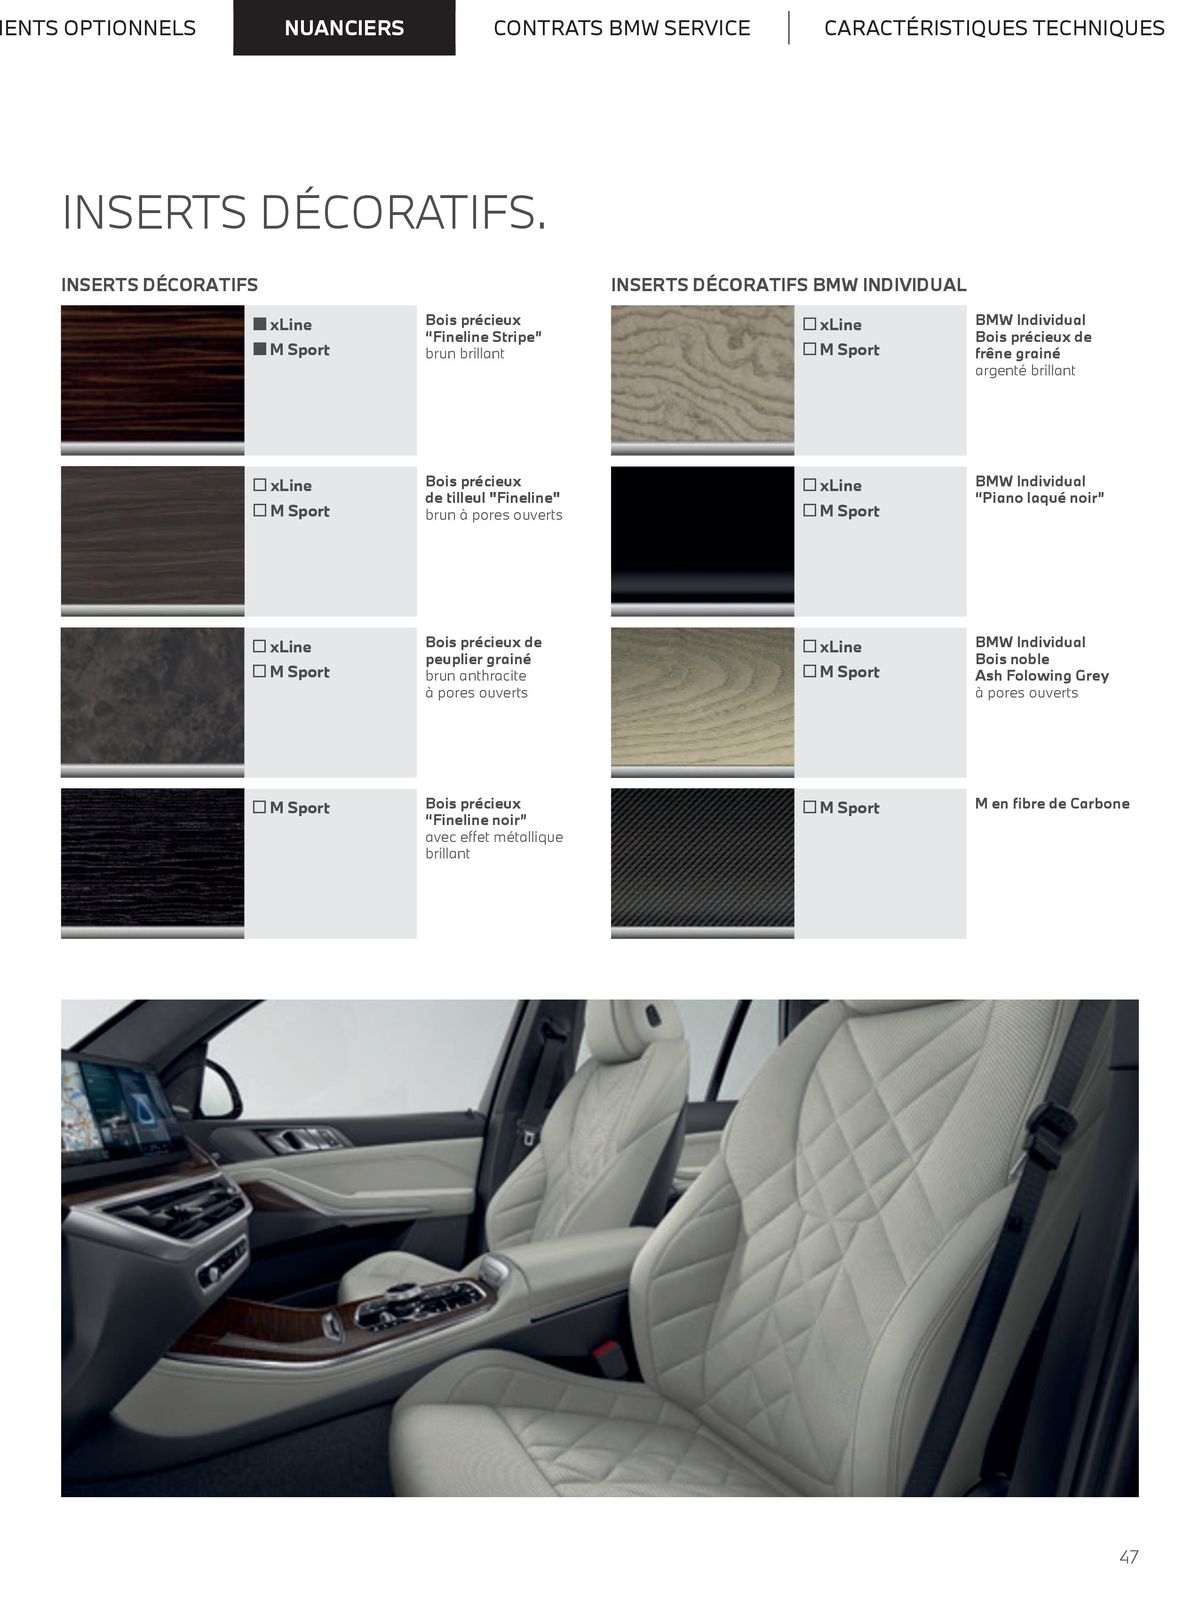 Catalogue The new X5, page 00047